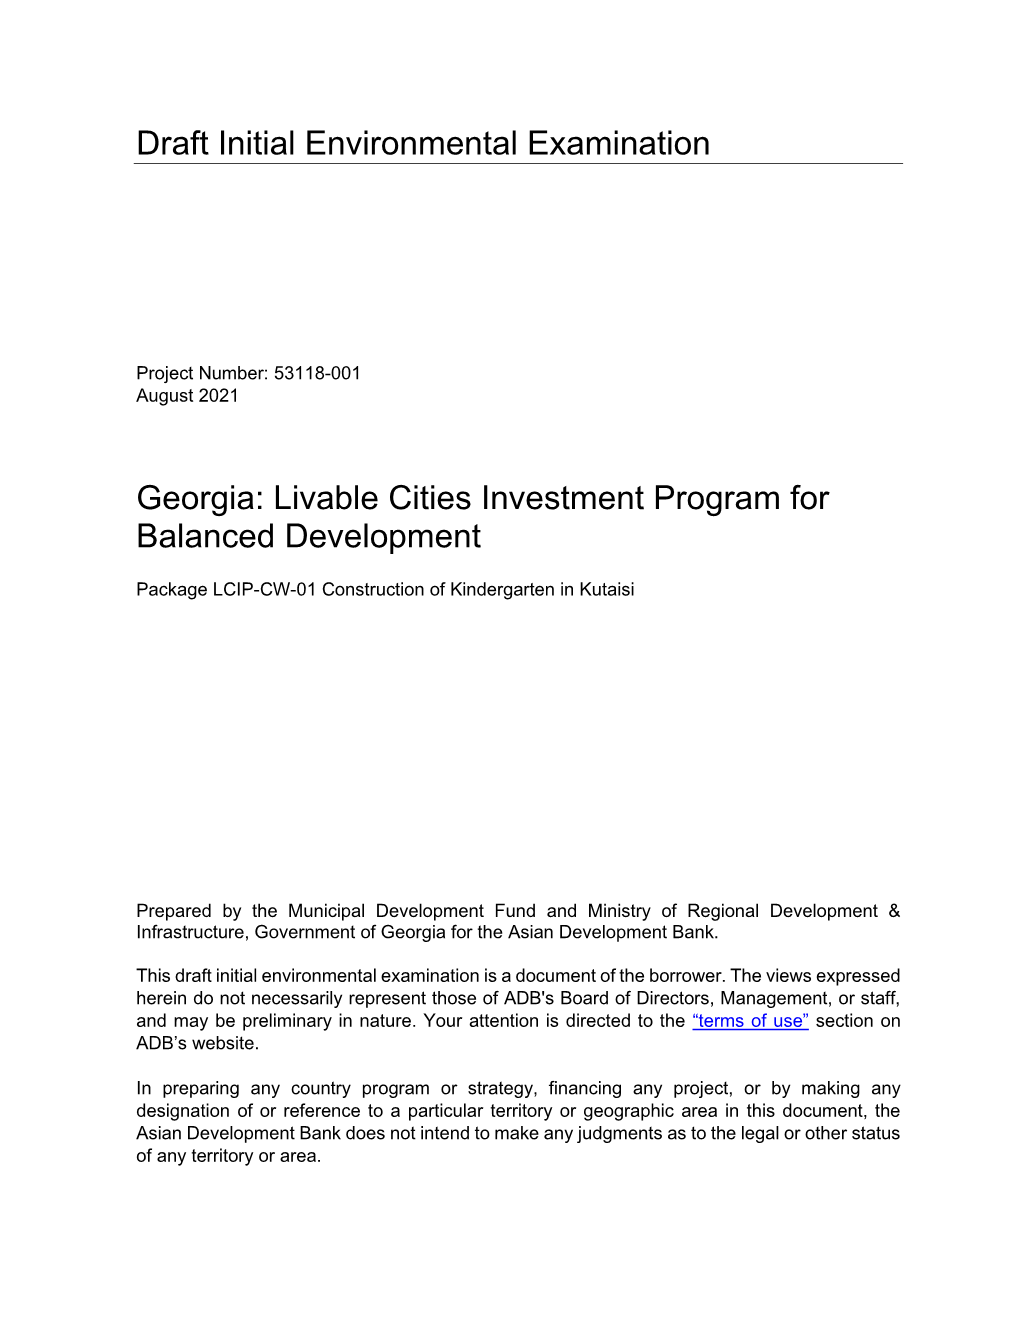 53118-001: Livable Cities Investment Project for Balanced Regional Development